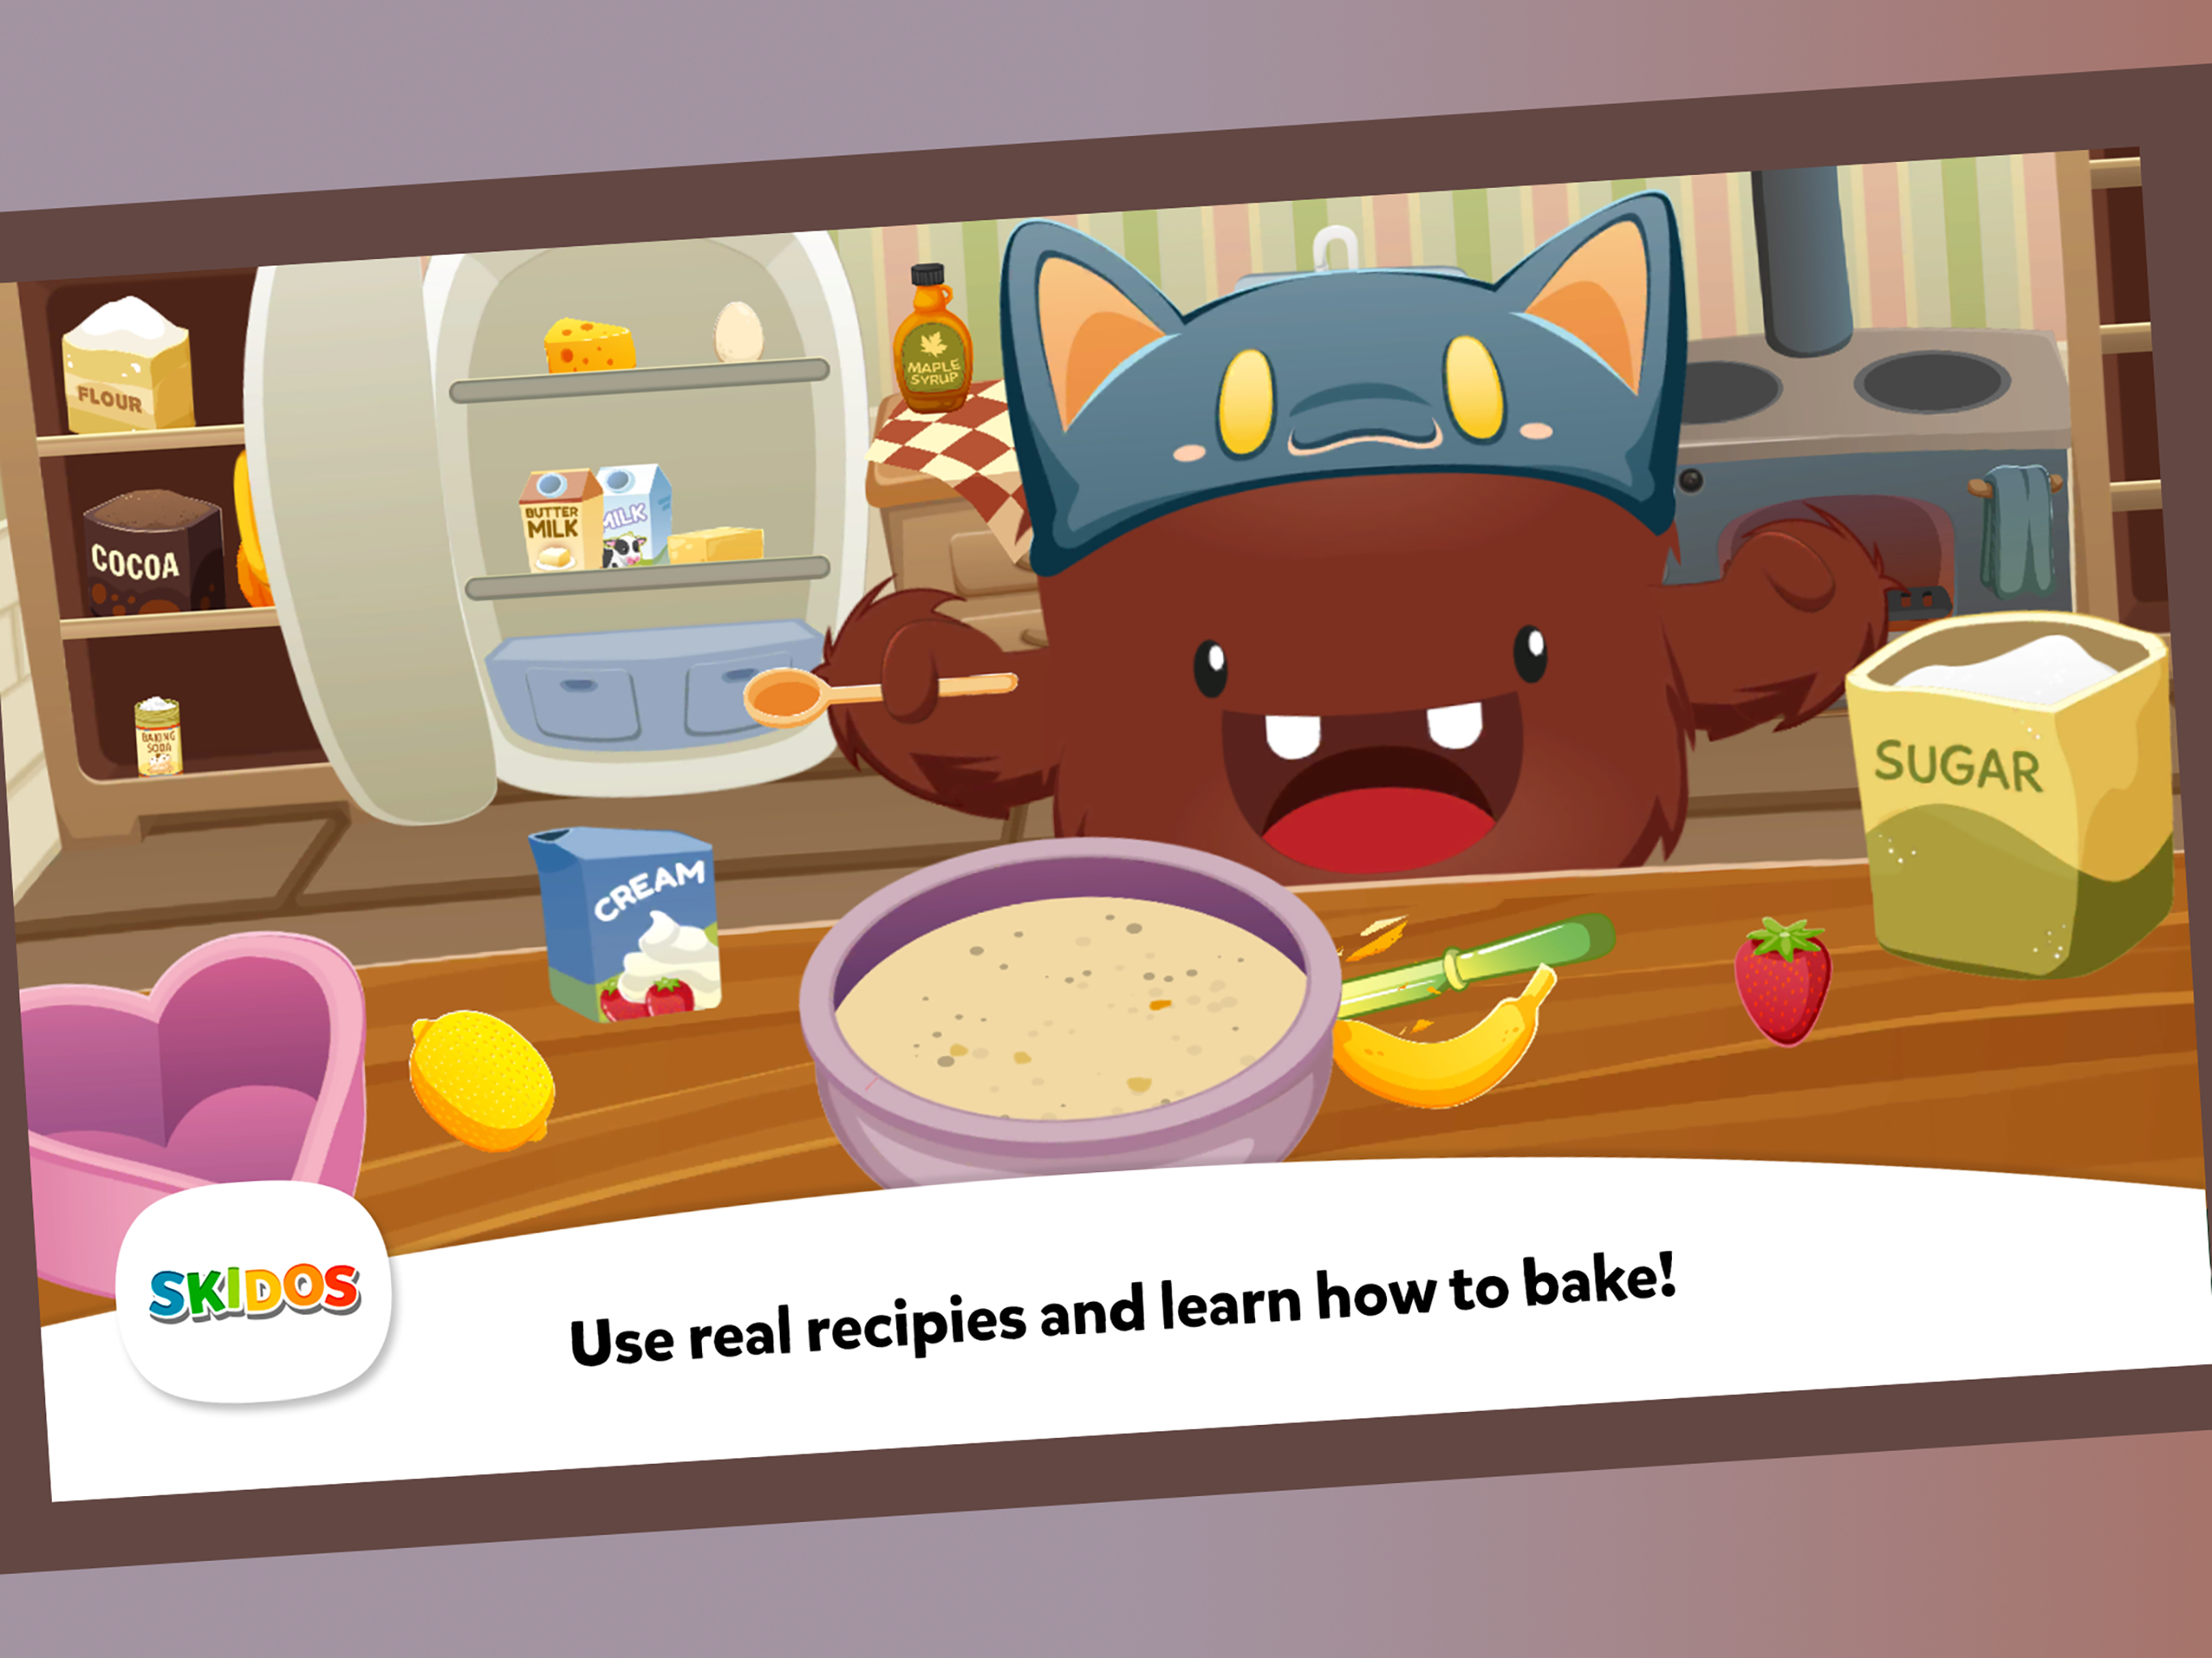 play cooking games on cool math